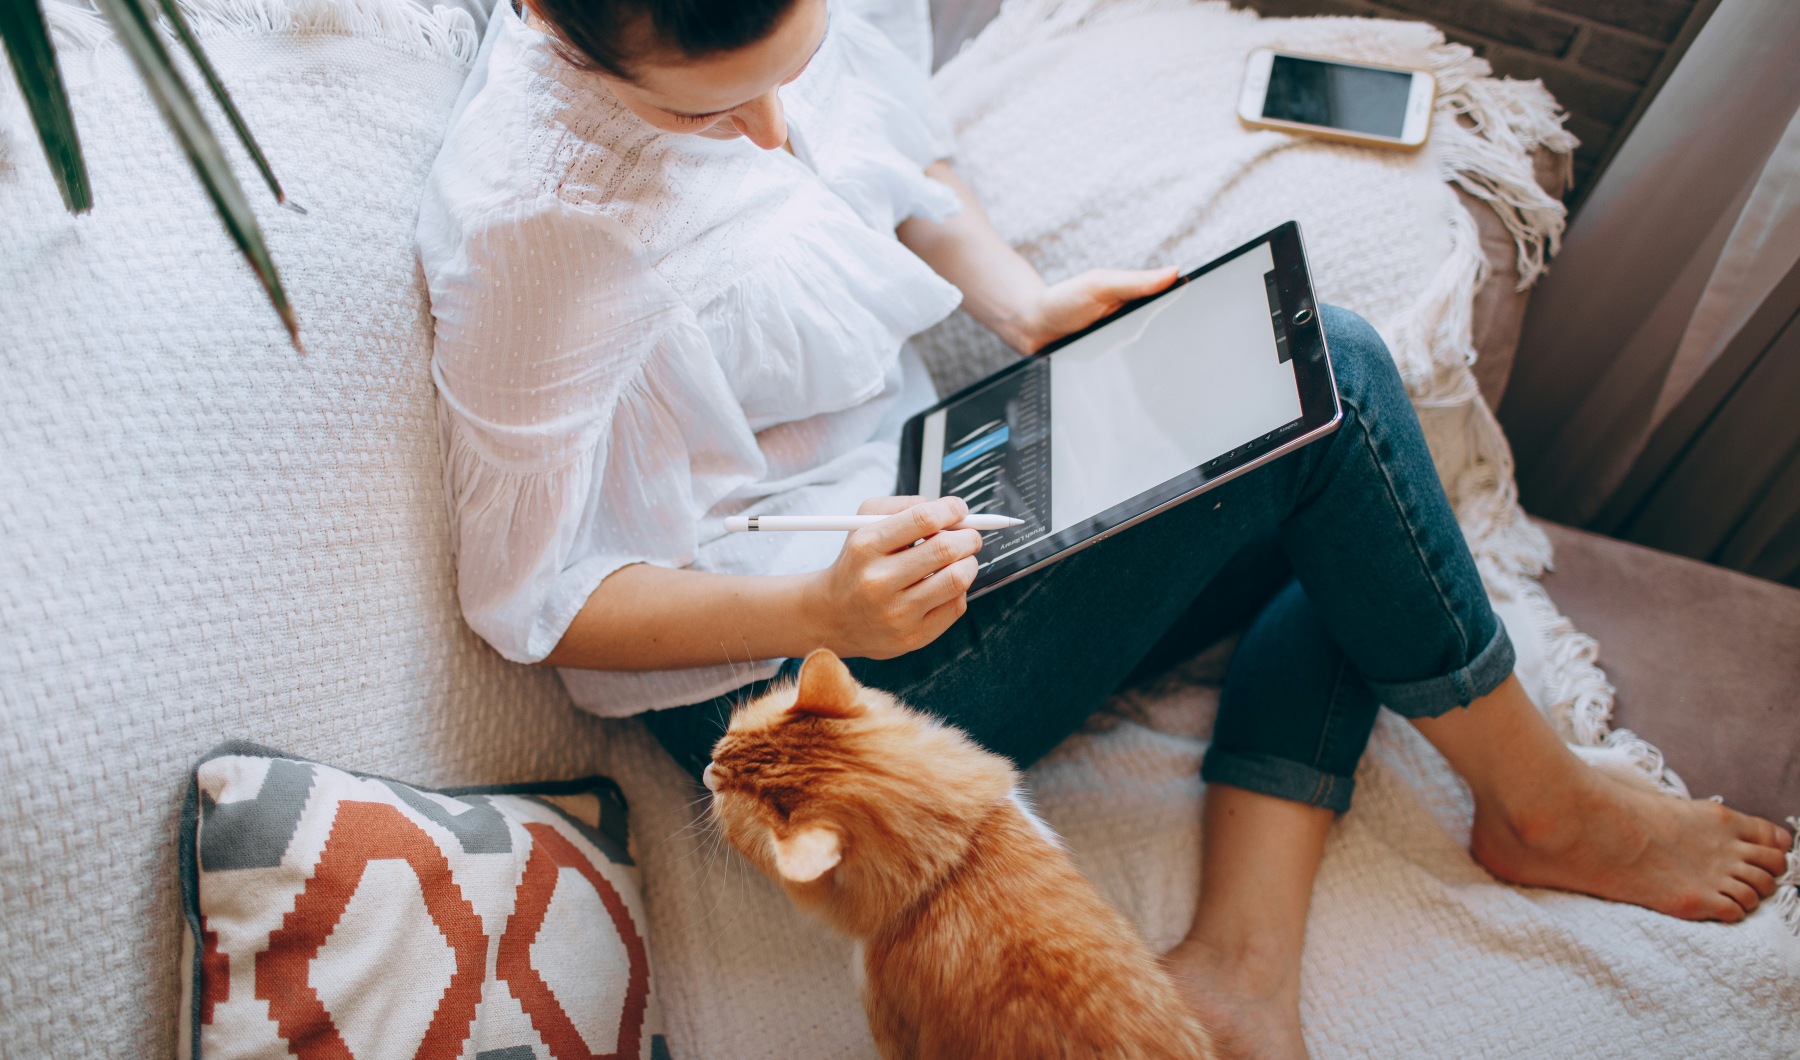 Woman sits on couch with cat while drawing on a tablet device.